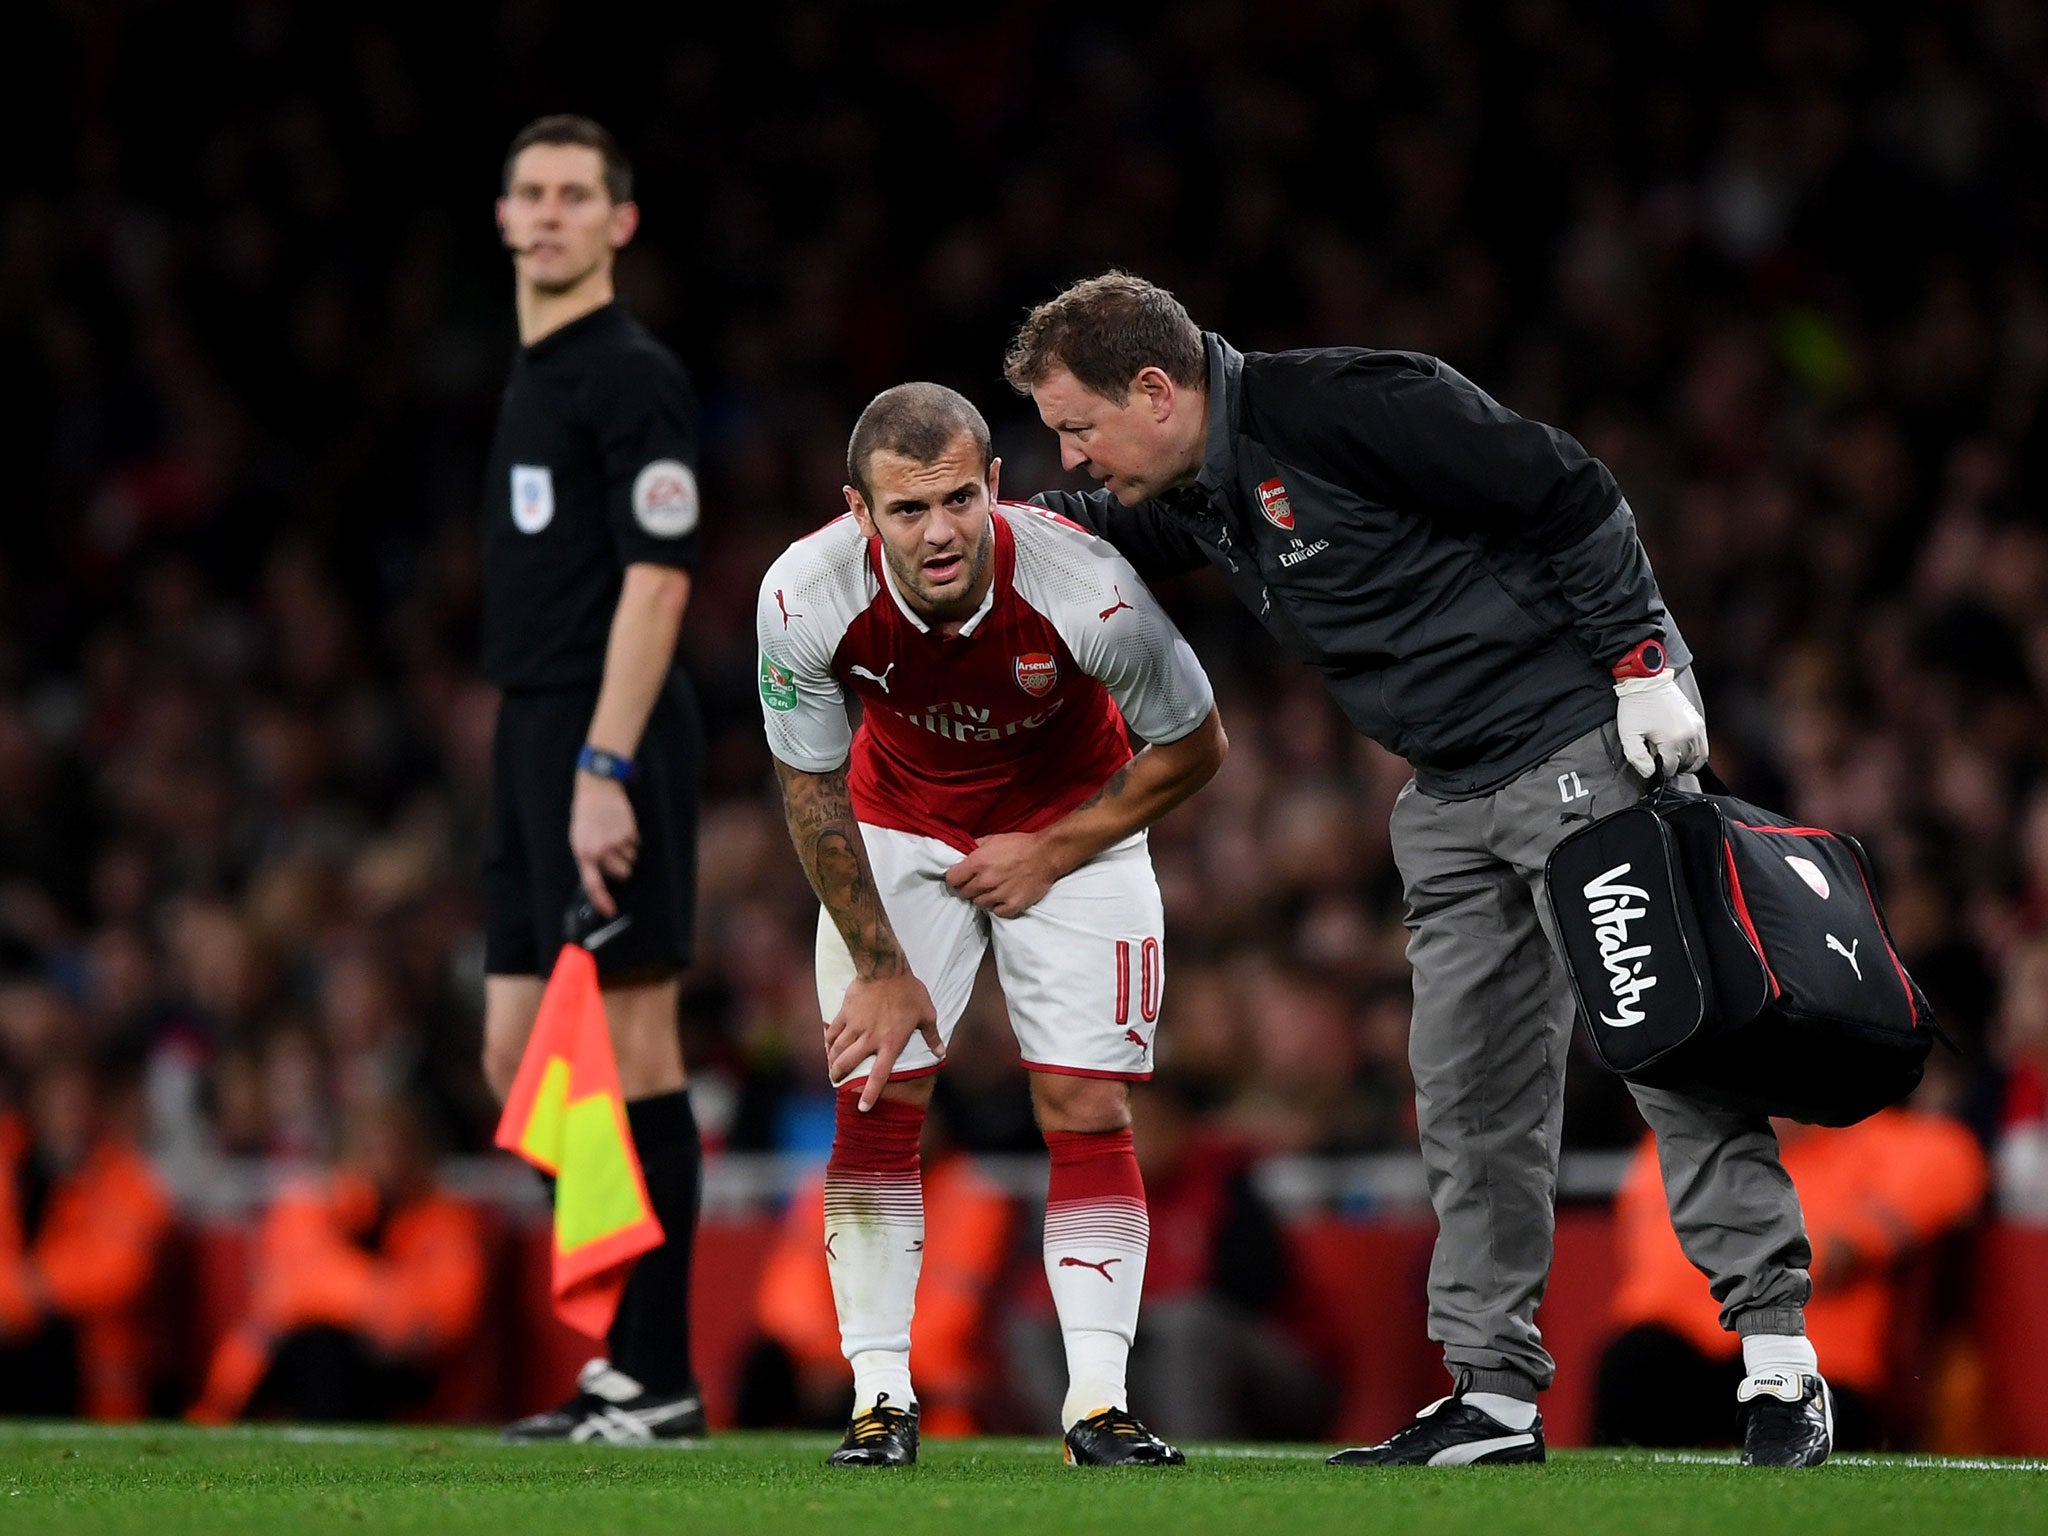 Wilshere missed his big chance to shine